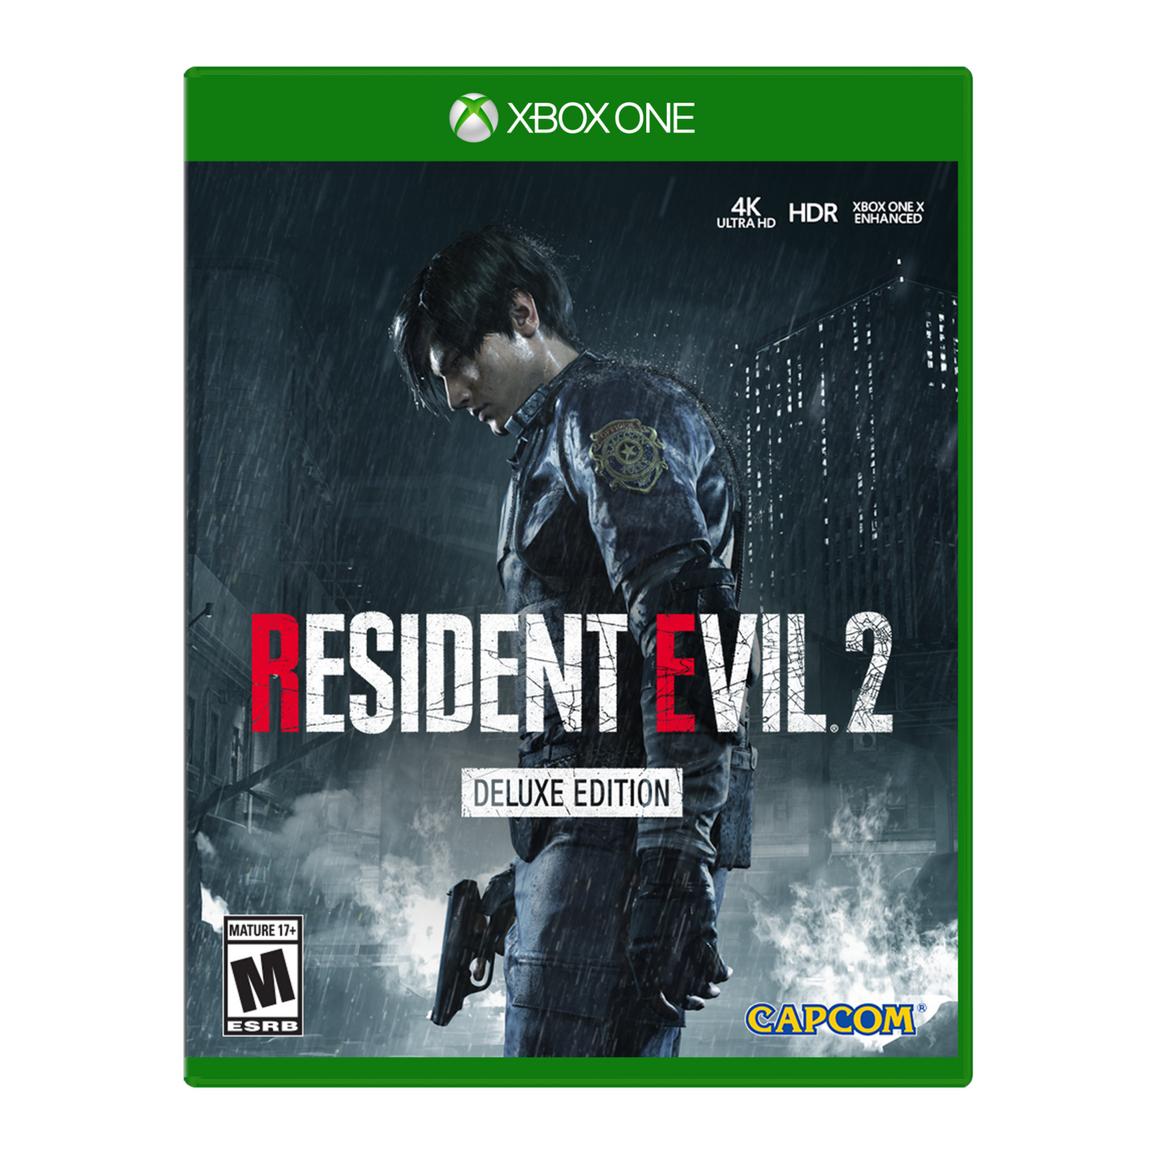 Resident Evil 2 Deluxe Edition - Xbox One -  Capcom, G3Q-00659